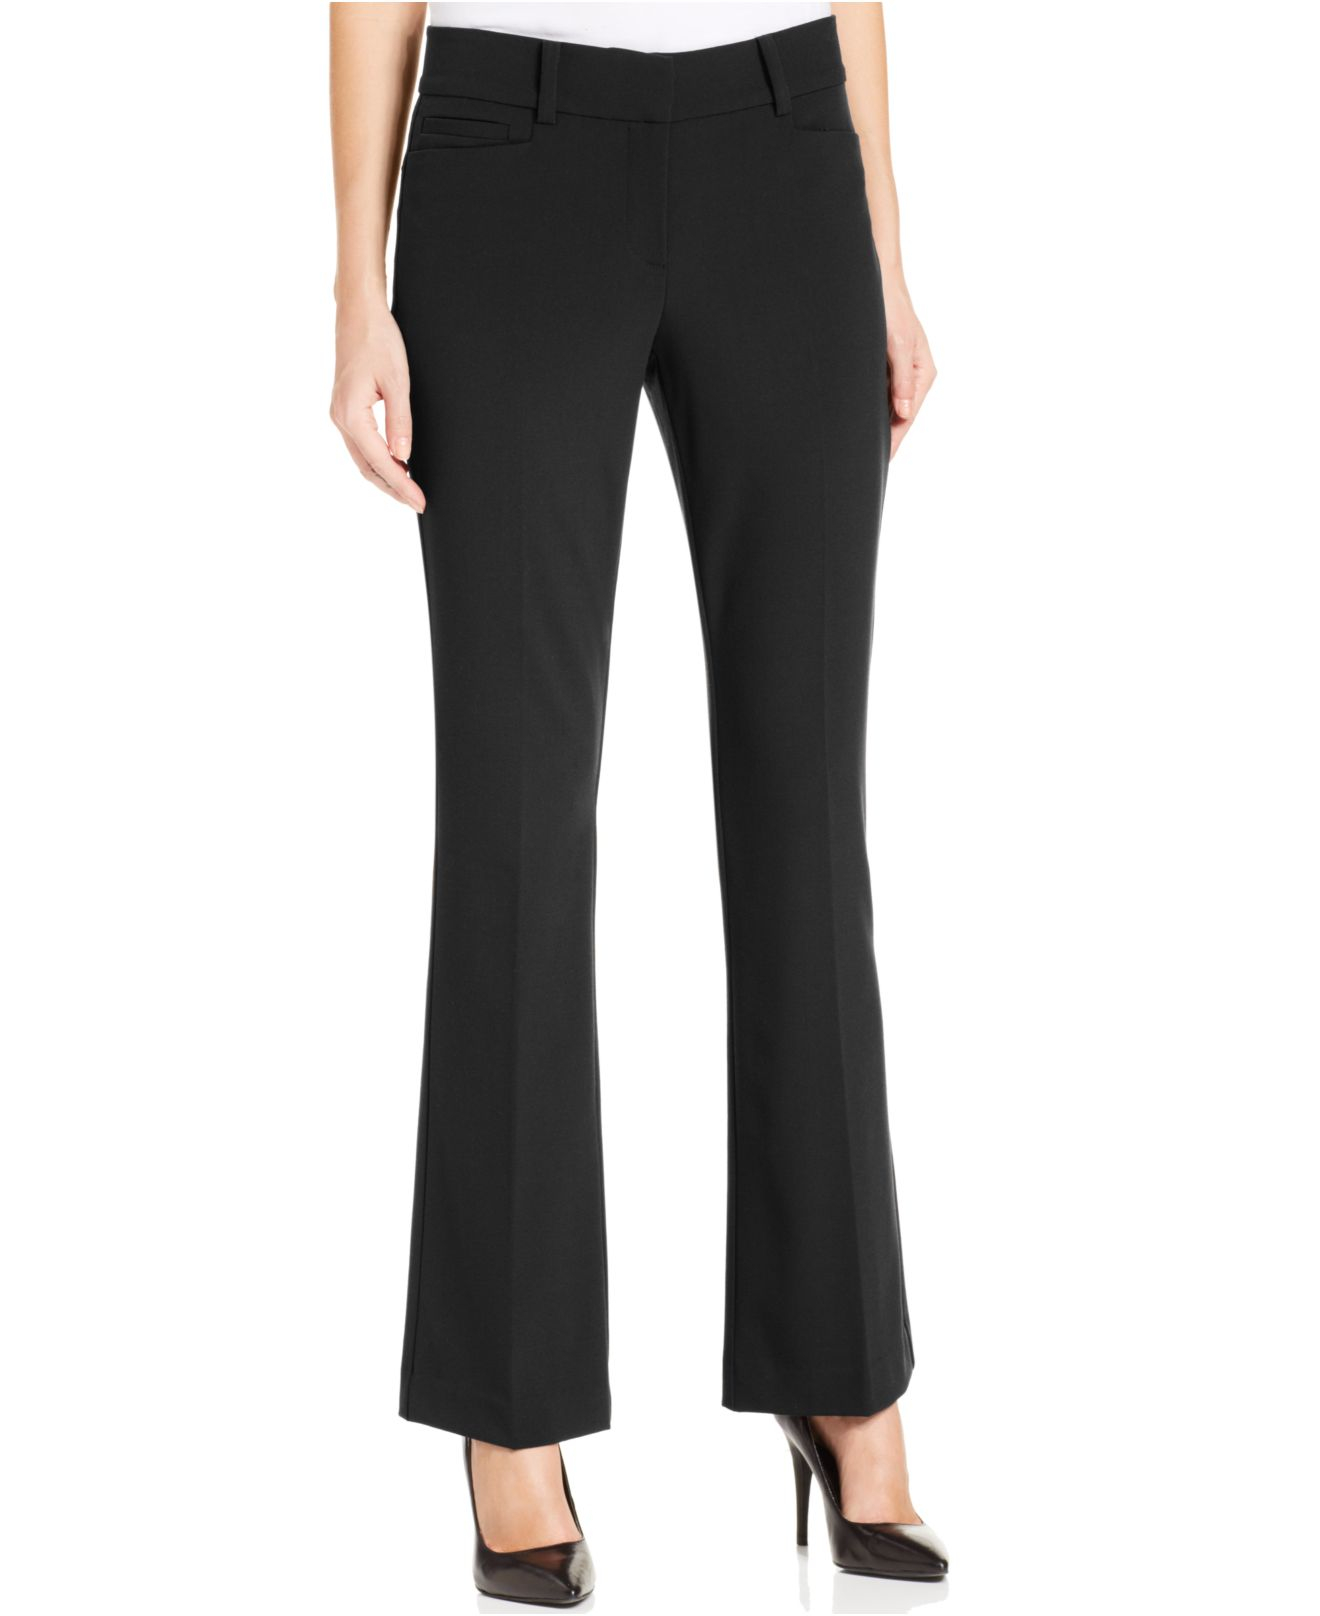 Style & co. Petite Tummy-Slimming Flare-Leg Pants in Black | Lyst